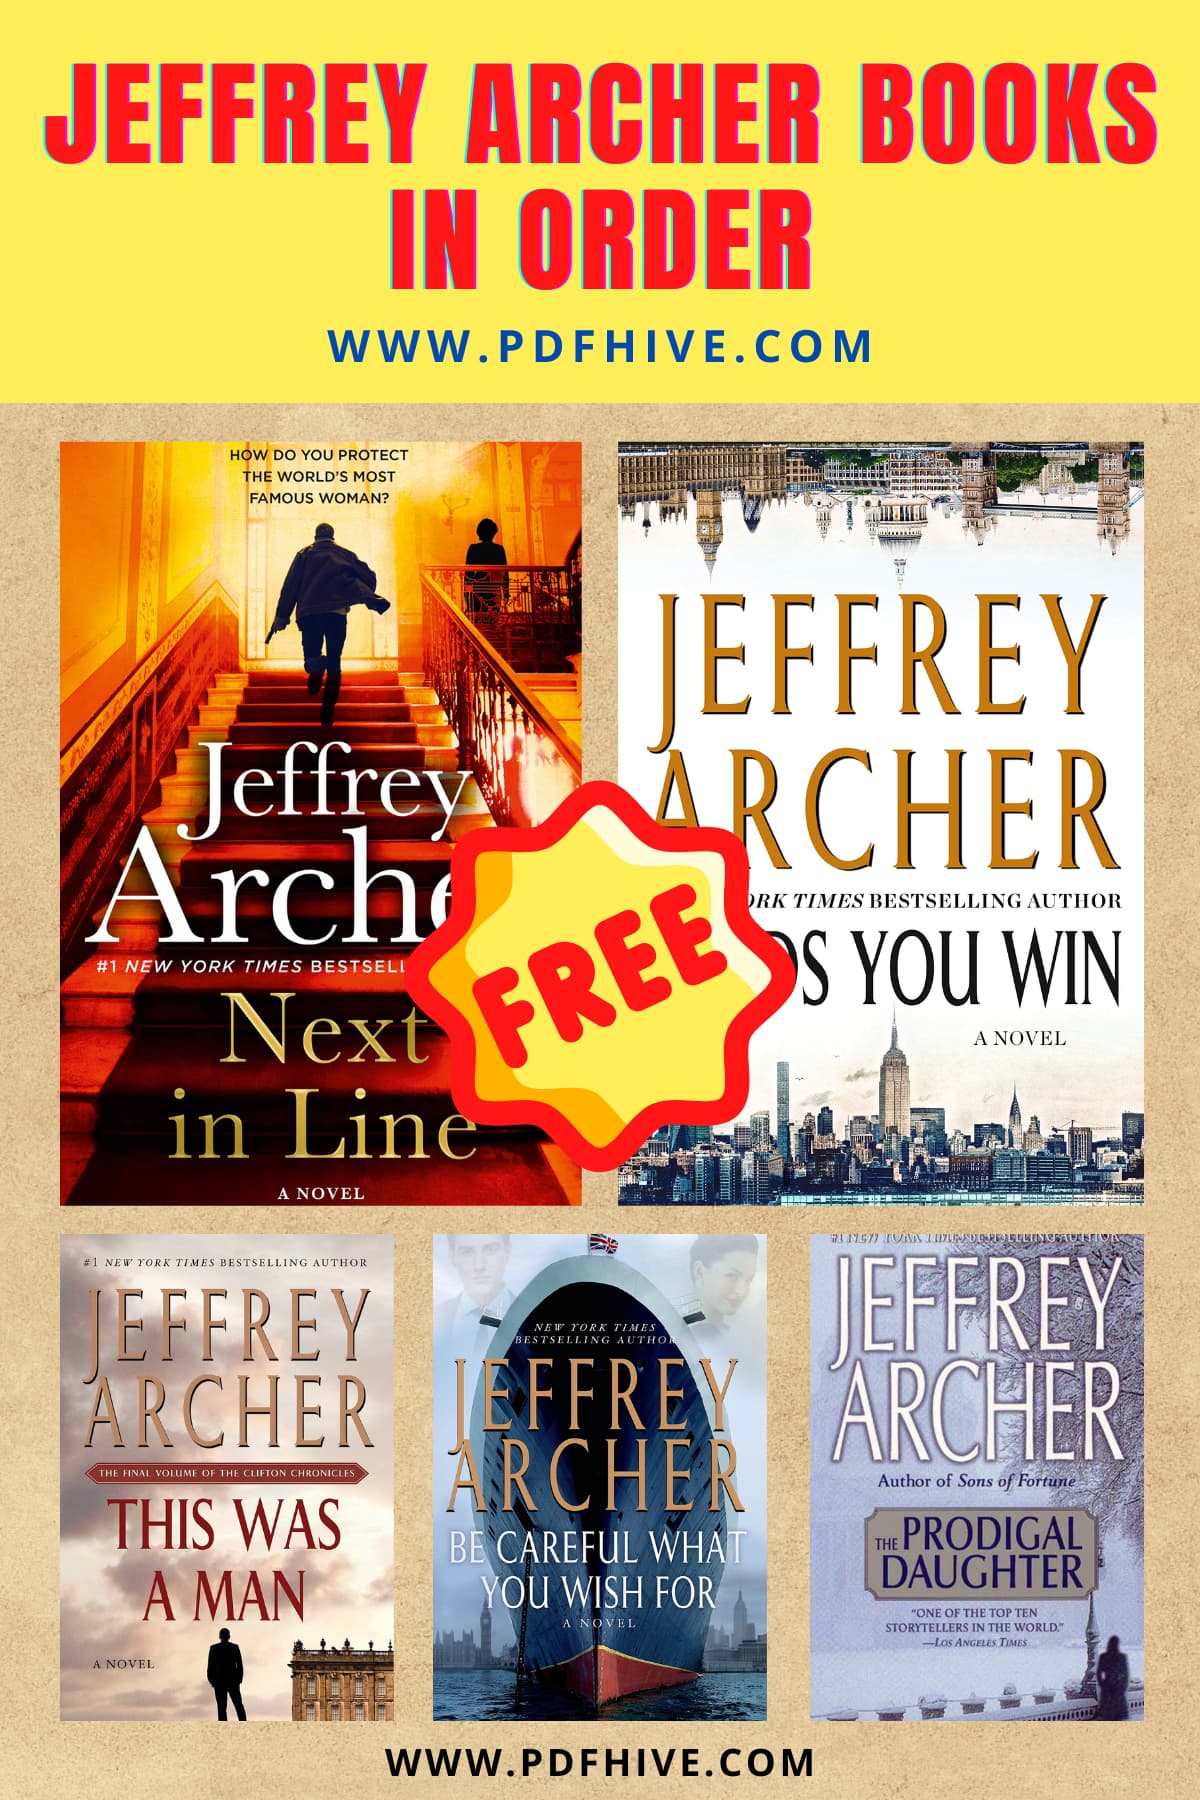 Bestsellers, Book Series, Book Series In Order, Books In Order, Crime Fiction and Mysteries, Historical Fiction, Historical Mysteries, Jeffrey Archer Books In Order, Thrillers